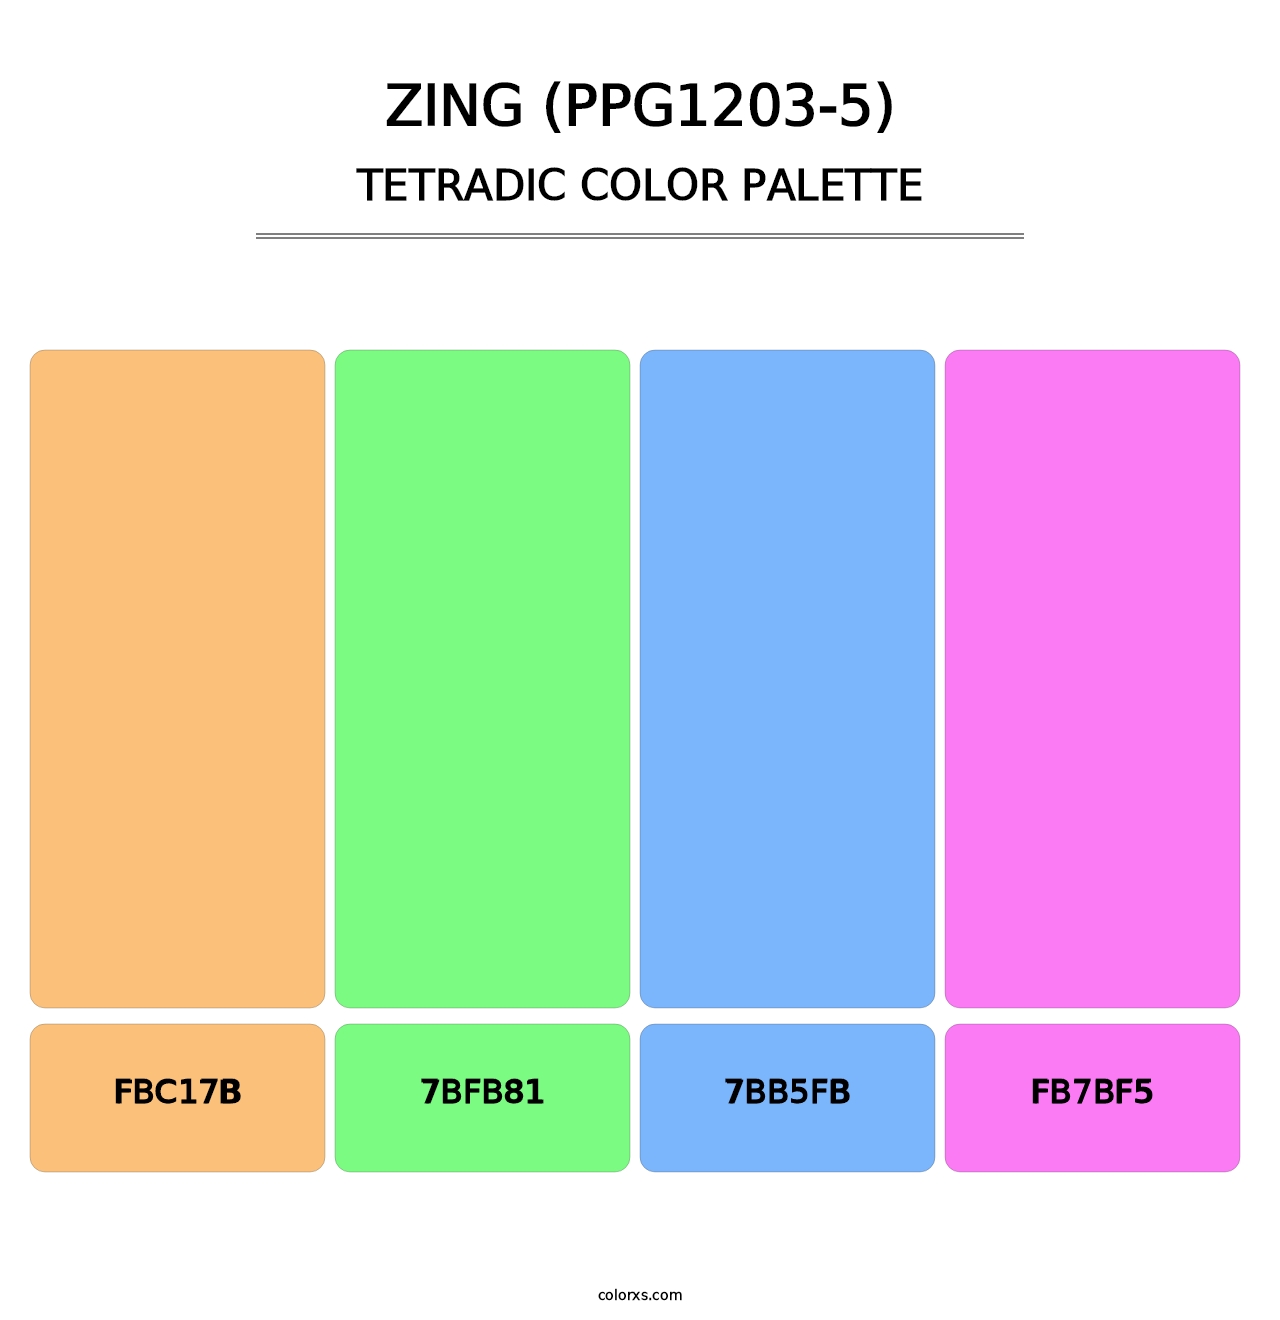 Zing (PPG1203-5) - Tetradic Color Palette